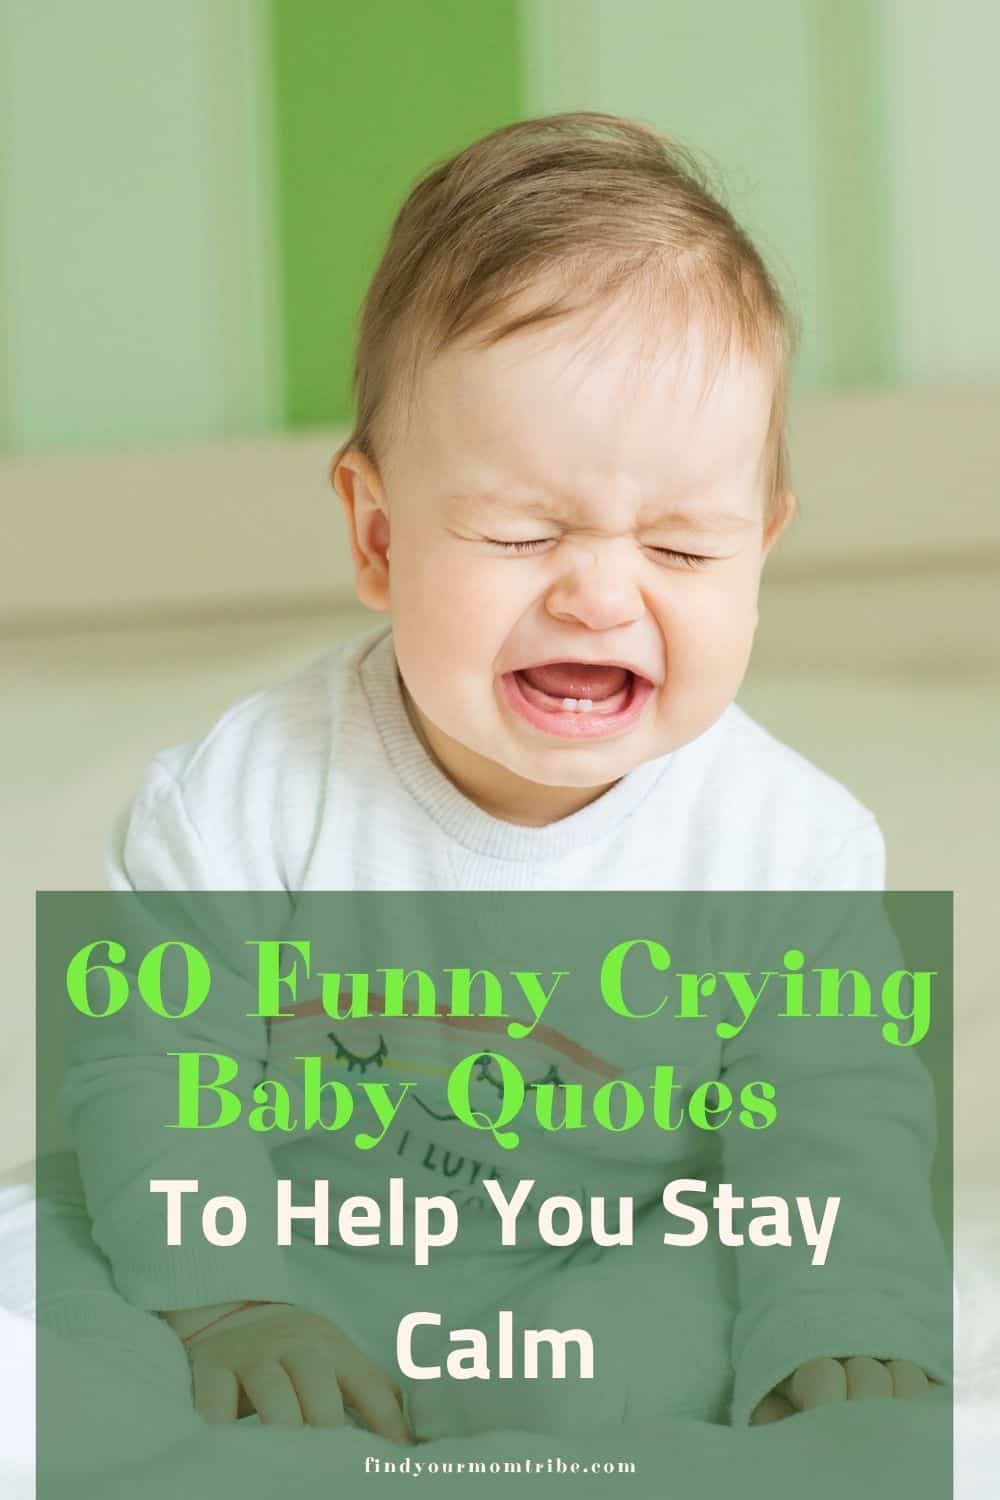 60 Funny Crying Baby Quotes To Help You Stay Calm